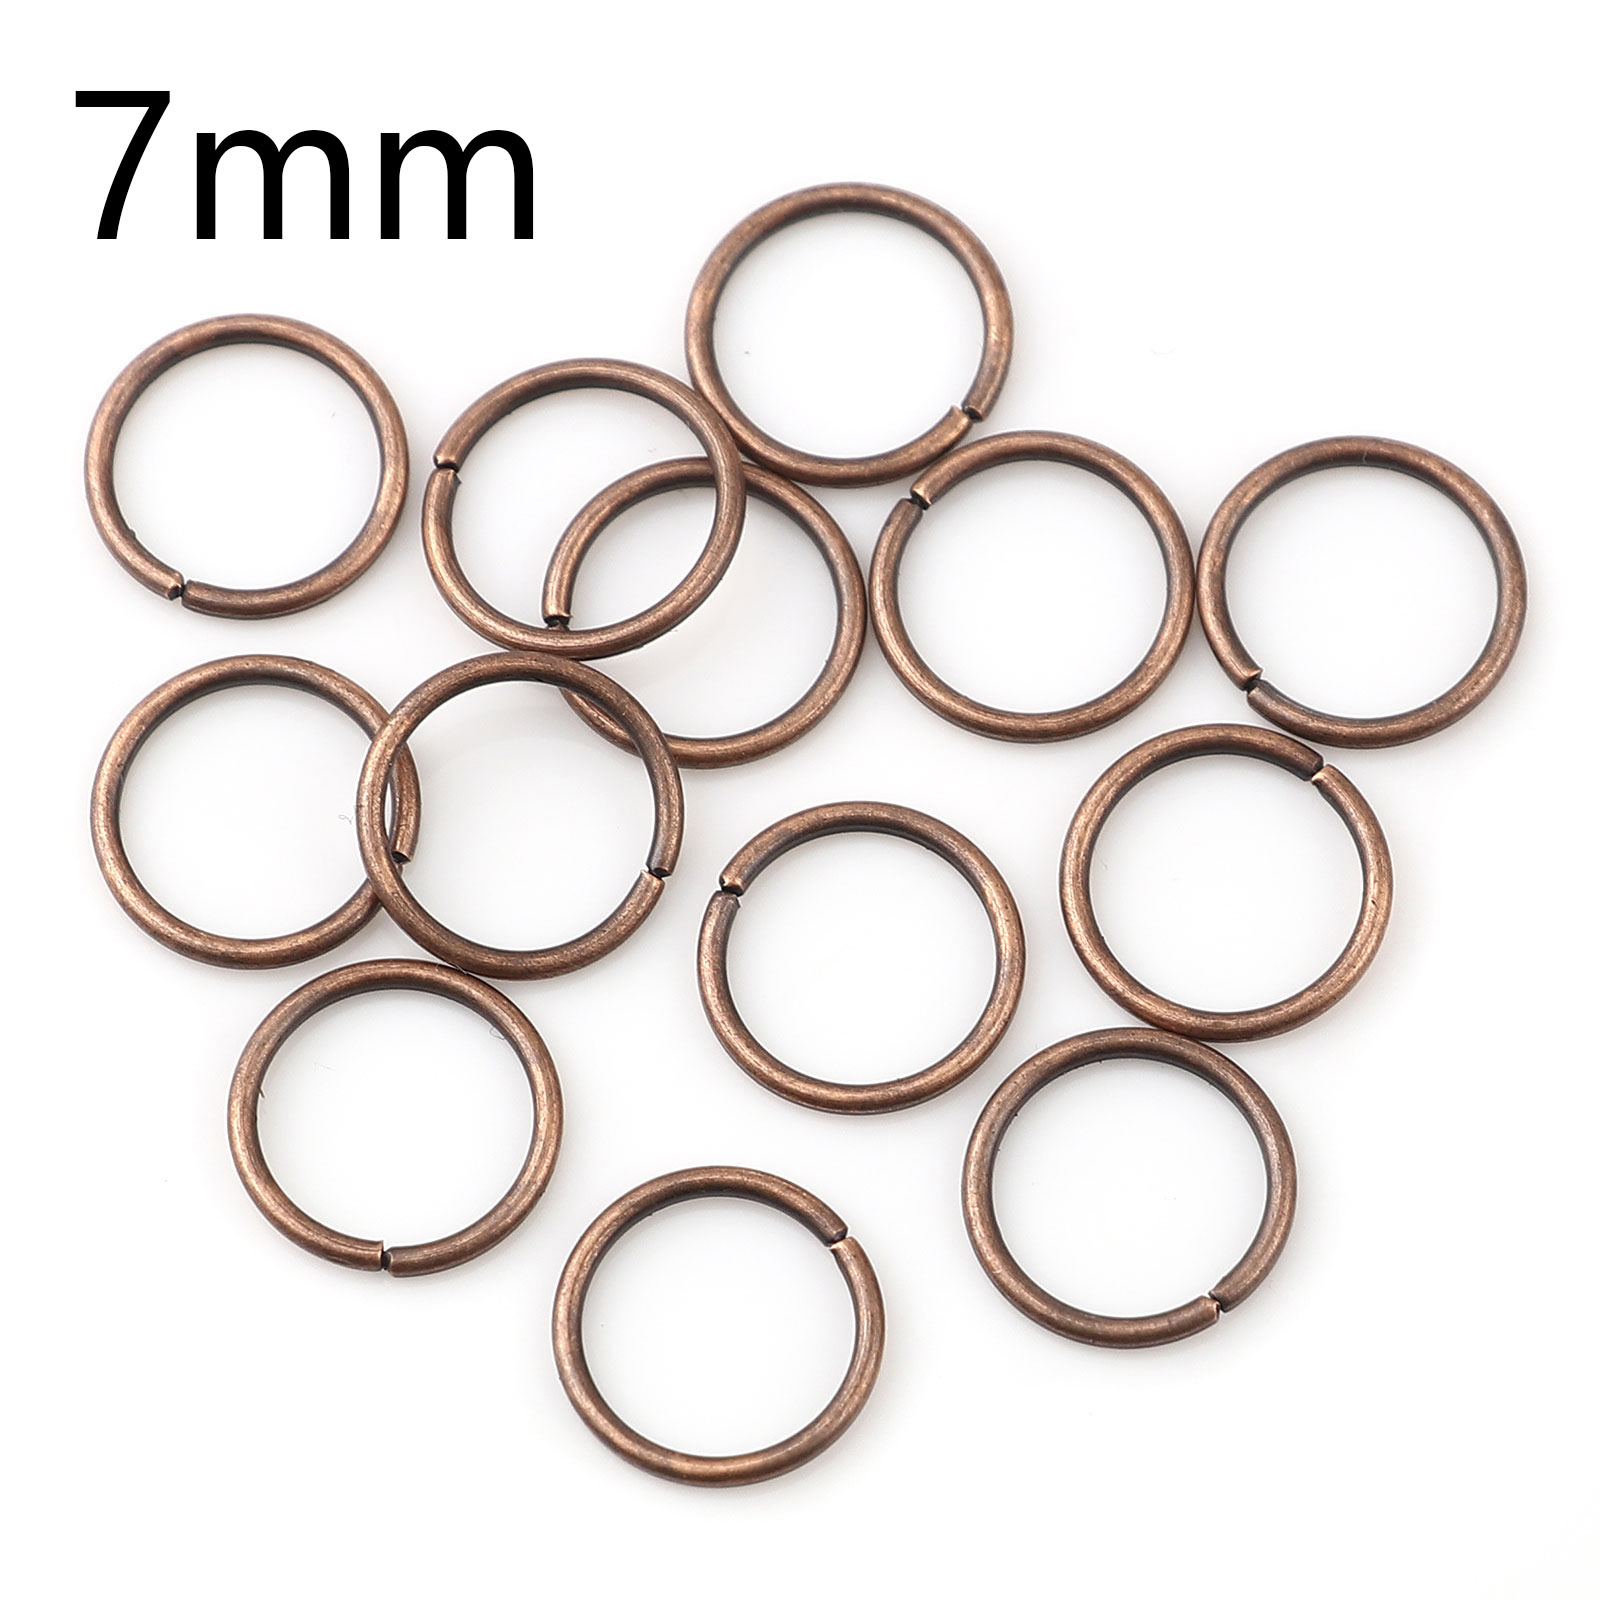 Picture of 0.7mm Iron Based Alloy Open Jump Rings Findings Circle Ring Antique Copper 7mm Dia, 200 PCs